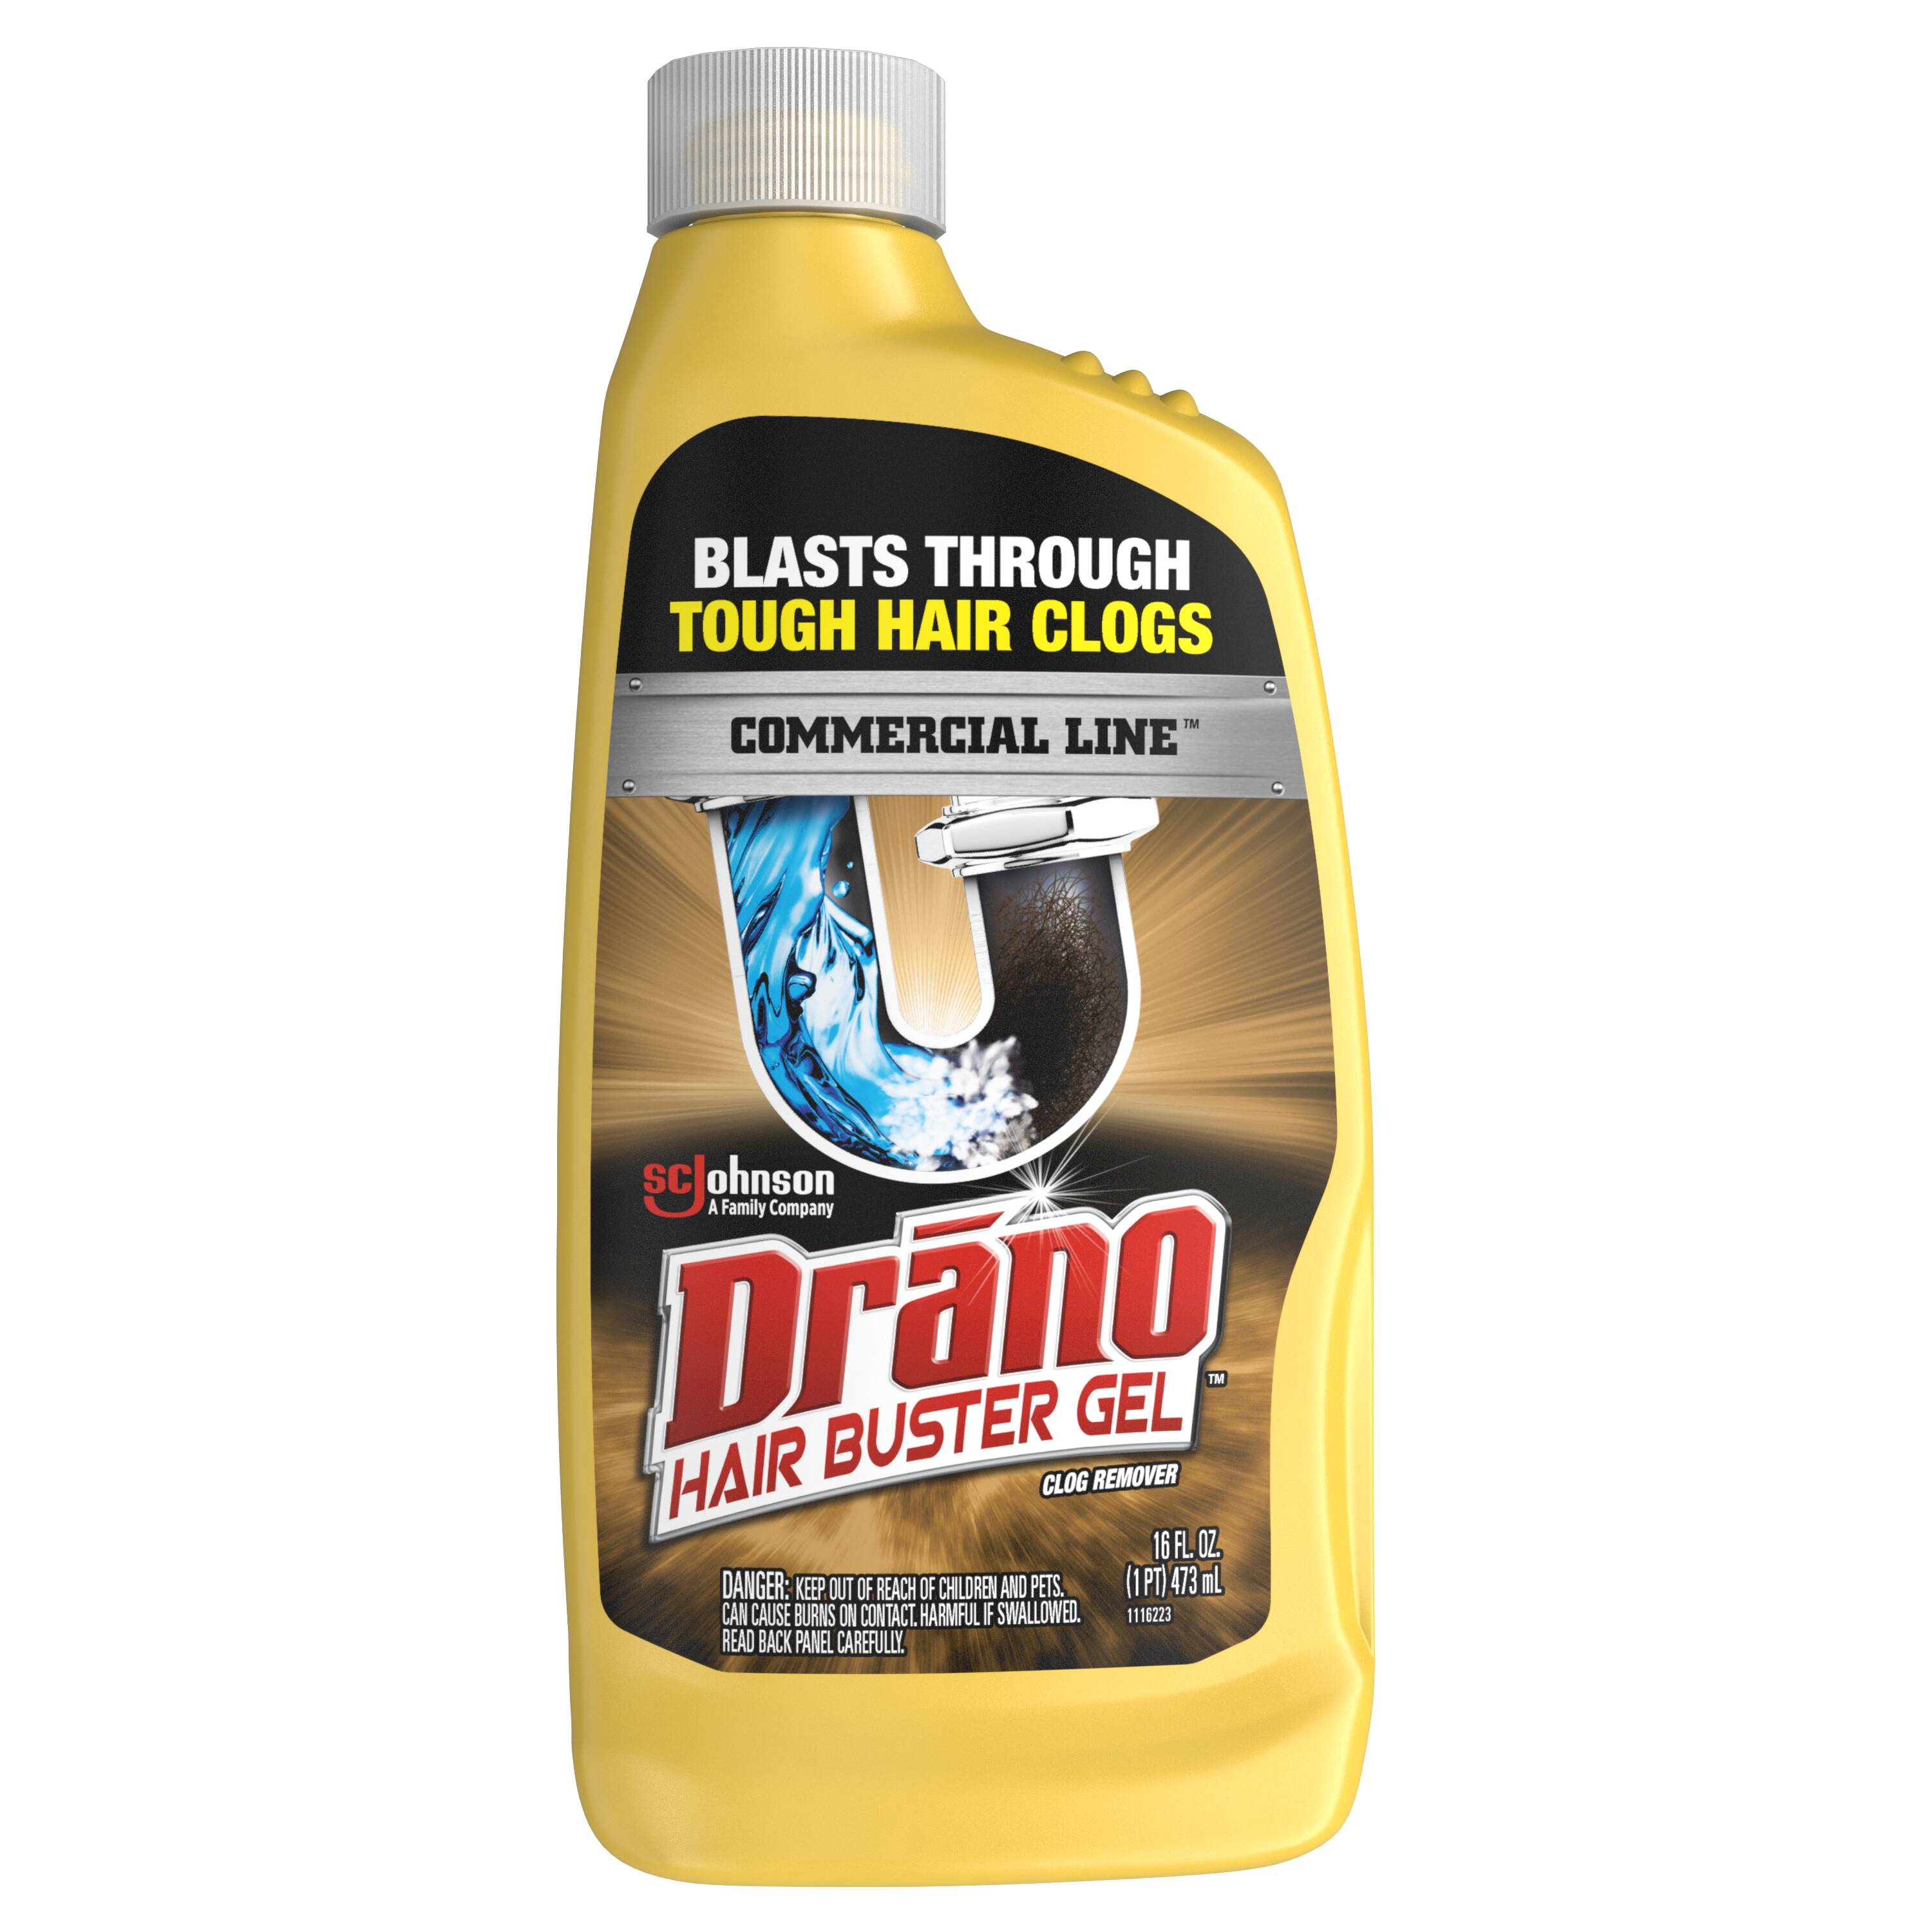 Drano Hair Buster Gel Commercial Line 16-fl oz Drain Cleaner in